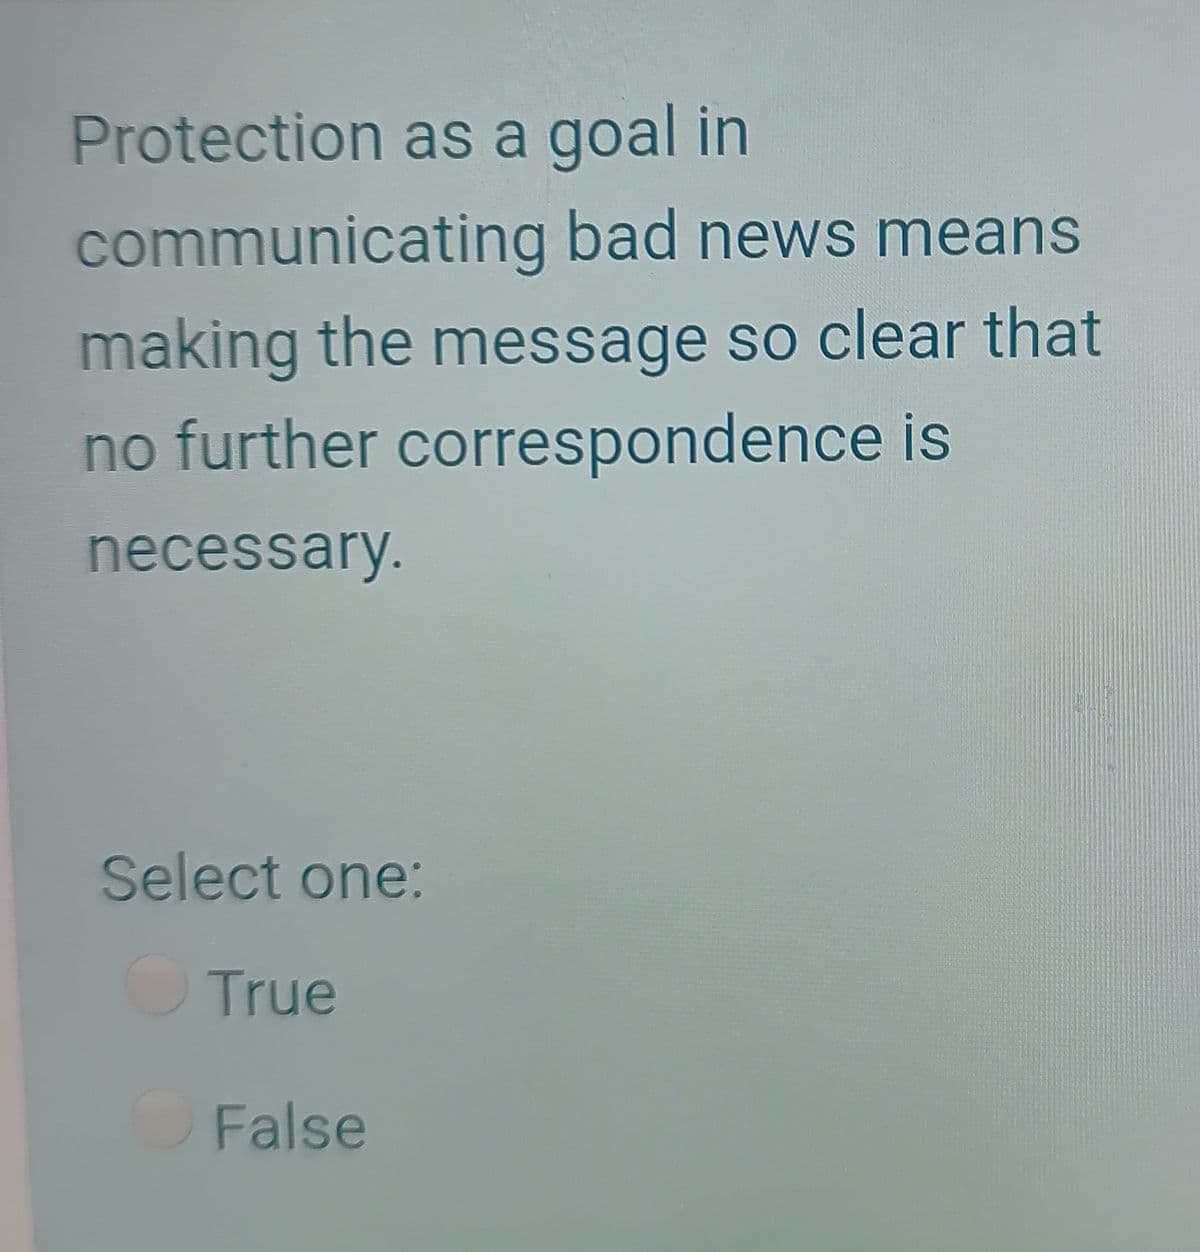 Protection as a goal in
communicating bad news means
making the message so clear that
no further correspondence is
necessary.
Select one:
OTrue
False
